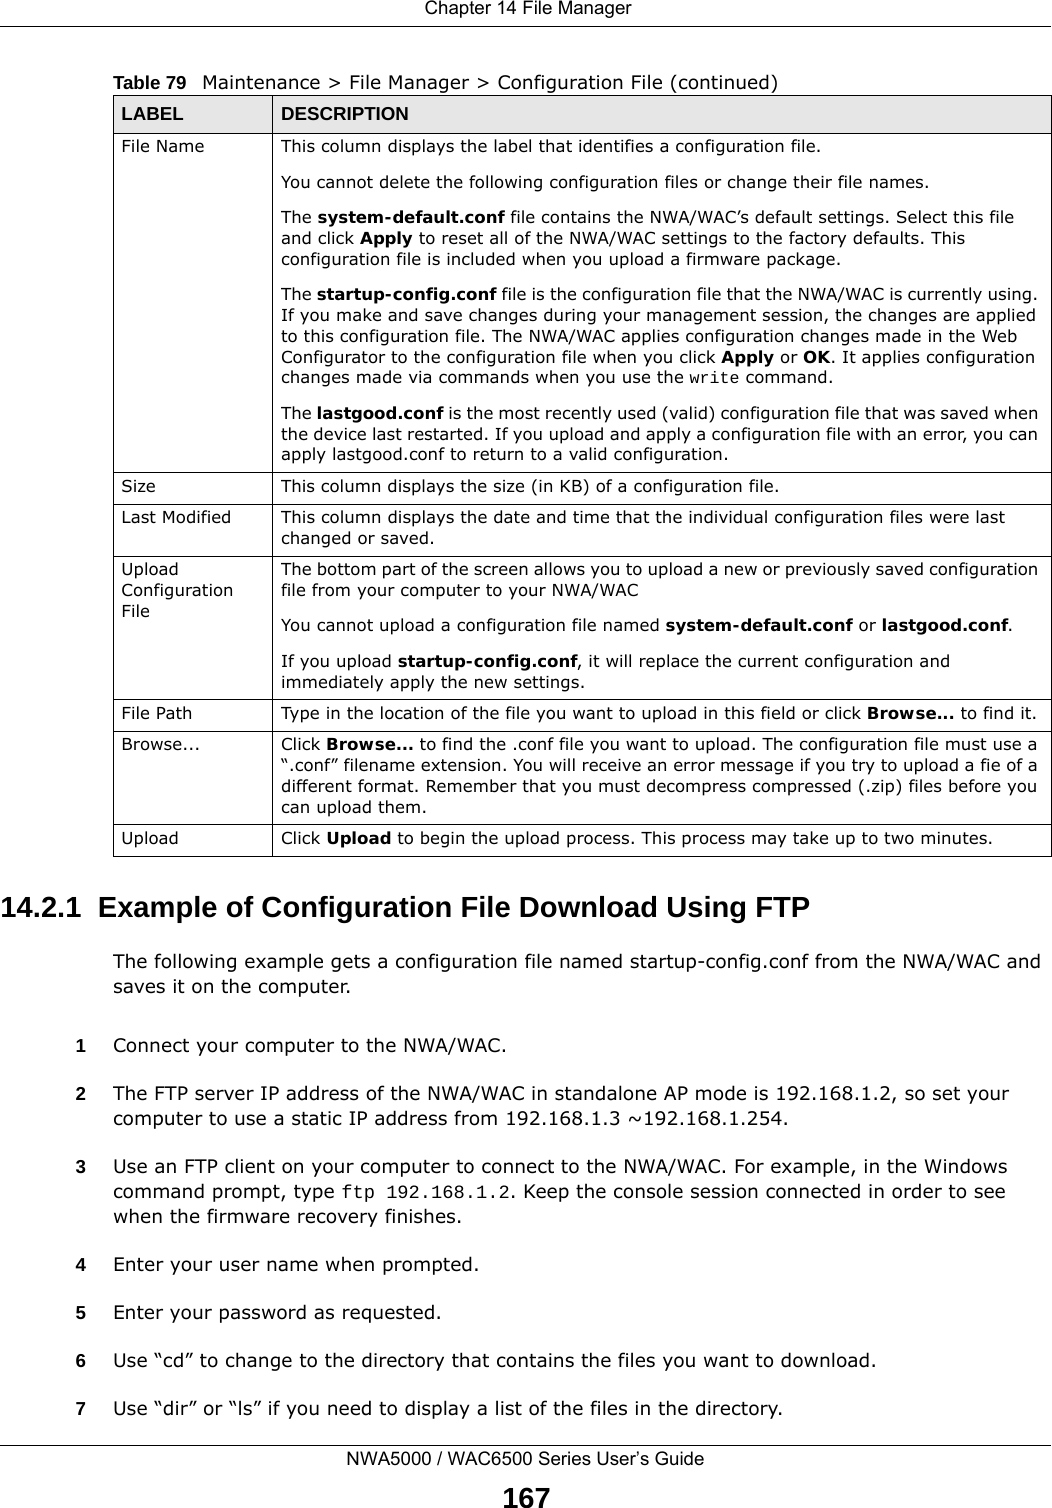  Chapter 14 File ManagerNWA5000 / WAC6500 Series User’s Guide16714.2.1  Example of Configuration File Download Using FTPThe following example gets a configuration file named startup-config.conf from the NWA/WAC and saves it on the computer.1Connect your computer to the NWA/WAC. 2The FTP server IP address of the NWA/WAC in standalone AP mode is 192.168.1.2, so set your computer to use a static IP address from 192.168.1.3 ~192.168.1.254.3Use an FTP client on your computer to connect to the NWA/WAC. For example, in the Windows command prompt, type ftp 192.168.1.2. Keep the console session connected in order to see when the firmware recovery finishes. 4Enter your user name when prompted.5Enter your password as requested.6Use “cd” to change to the directory that contains the files you want to download. 7Use “dir” or “ls” if you need to display a list of the files in the directory.File Name This column displays the label that identifies a configuration file.You cannot delete the following configuration files or change their file names. The system-default.conf file contains the NWA/WAC’s default settings. Select this file and click Apply to reset all of the NWA/WAC settings to the factory defaults. This configuration file is included when you upload a firmware package. The startup-config.conf file is the configuration file that the NWA/WAC is currently using. If you make and save changes during your management session, the changes are applied to this configuration file. The NWA/WAC applies configuration changes made in the Web Configurator to the configuration file when you click Apply or OK. It applies configuration changes made via commands when you use the write command. The lastgood.conf is the most recently used (valid) configuration file that was saved when the device last restarted. If you upload and apply a configuration file with an error, you can apply lastgood.conf to return to a valid configuration.Size This column displays the size (in KB) of a configuration file.Last Modified This column displays the date and time that the individual configuration files were last changed or saved.Upload Configuration FileThe bottom part of the screen allows you to upload a new or previously saved configuration file from your computer to your NWA/WACYou cannot upload a configuration file named system-default.conf or lastgood.conf. If you upload startup-config.conf, it will replace the current configuration and immediately apply the new settings.File Path  Type in the location of the file you want to upload in this field or click Browse... to find it.Browse...  Click Browse... to find the .conf file you want to upload. The configuration file must use a “.conf” filename extension. You will receive an error message if you try to upload a fie of a different format. Remember that you must decompress compressed (.zip) files before you can upload them. Upload  Click Upload to begin the upload process. This process may take up to two minutes. Table 79   Maintenance &gt; File Manager &gt; Configuration File (continued)LABEL DESCRIPTION